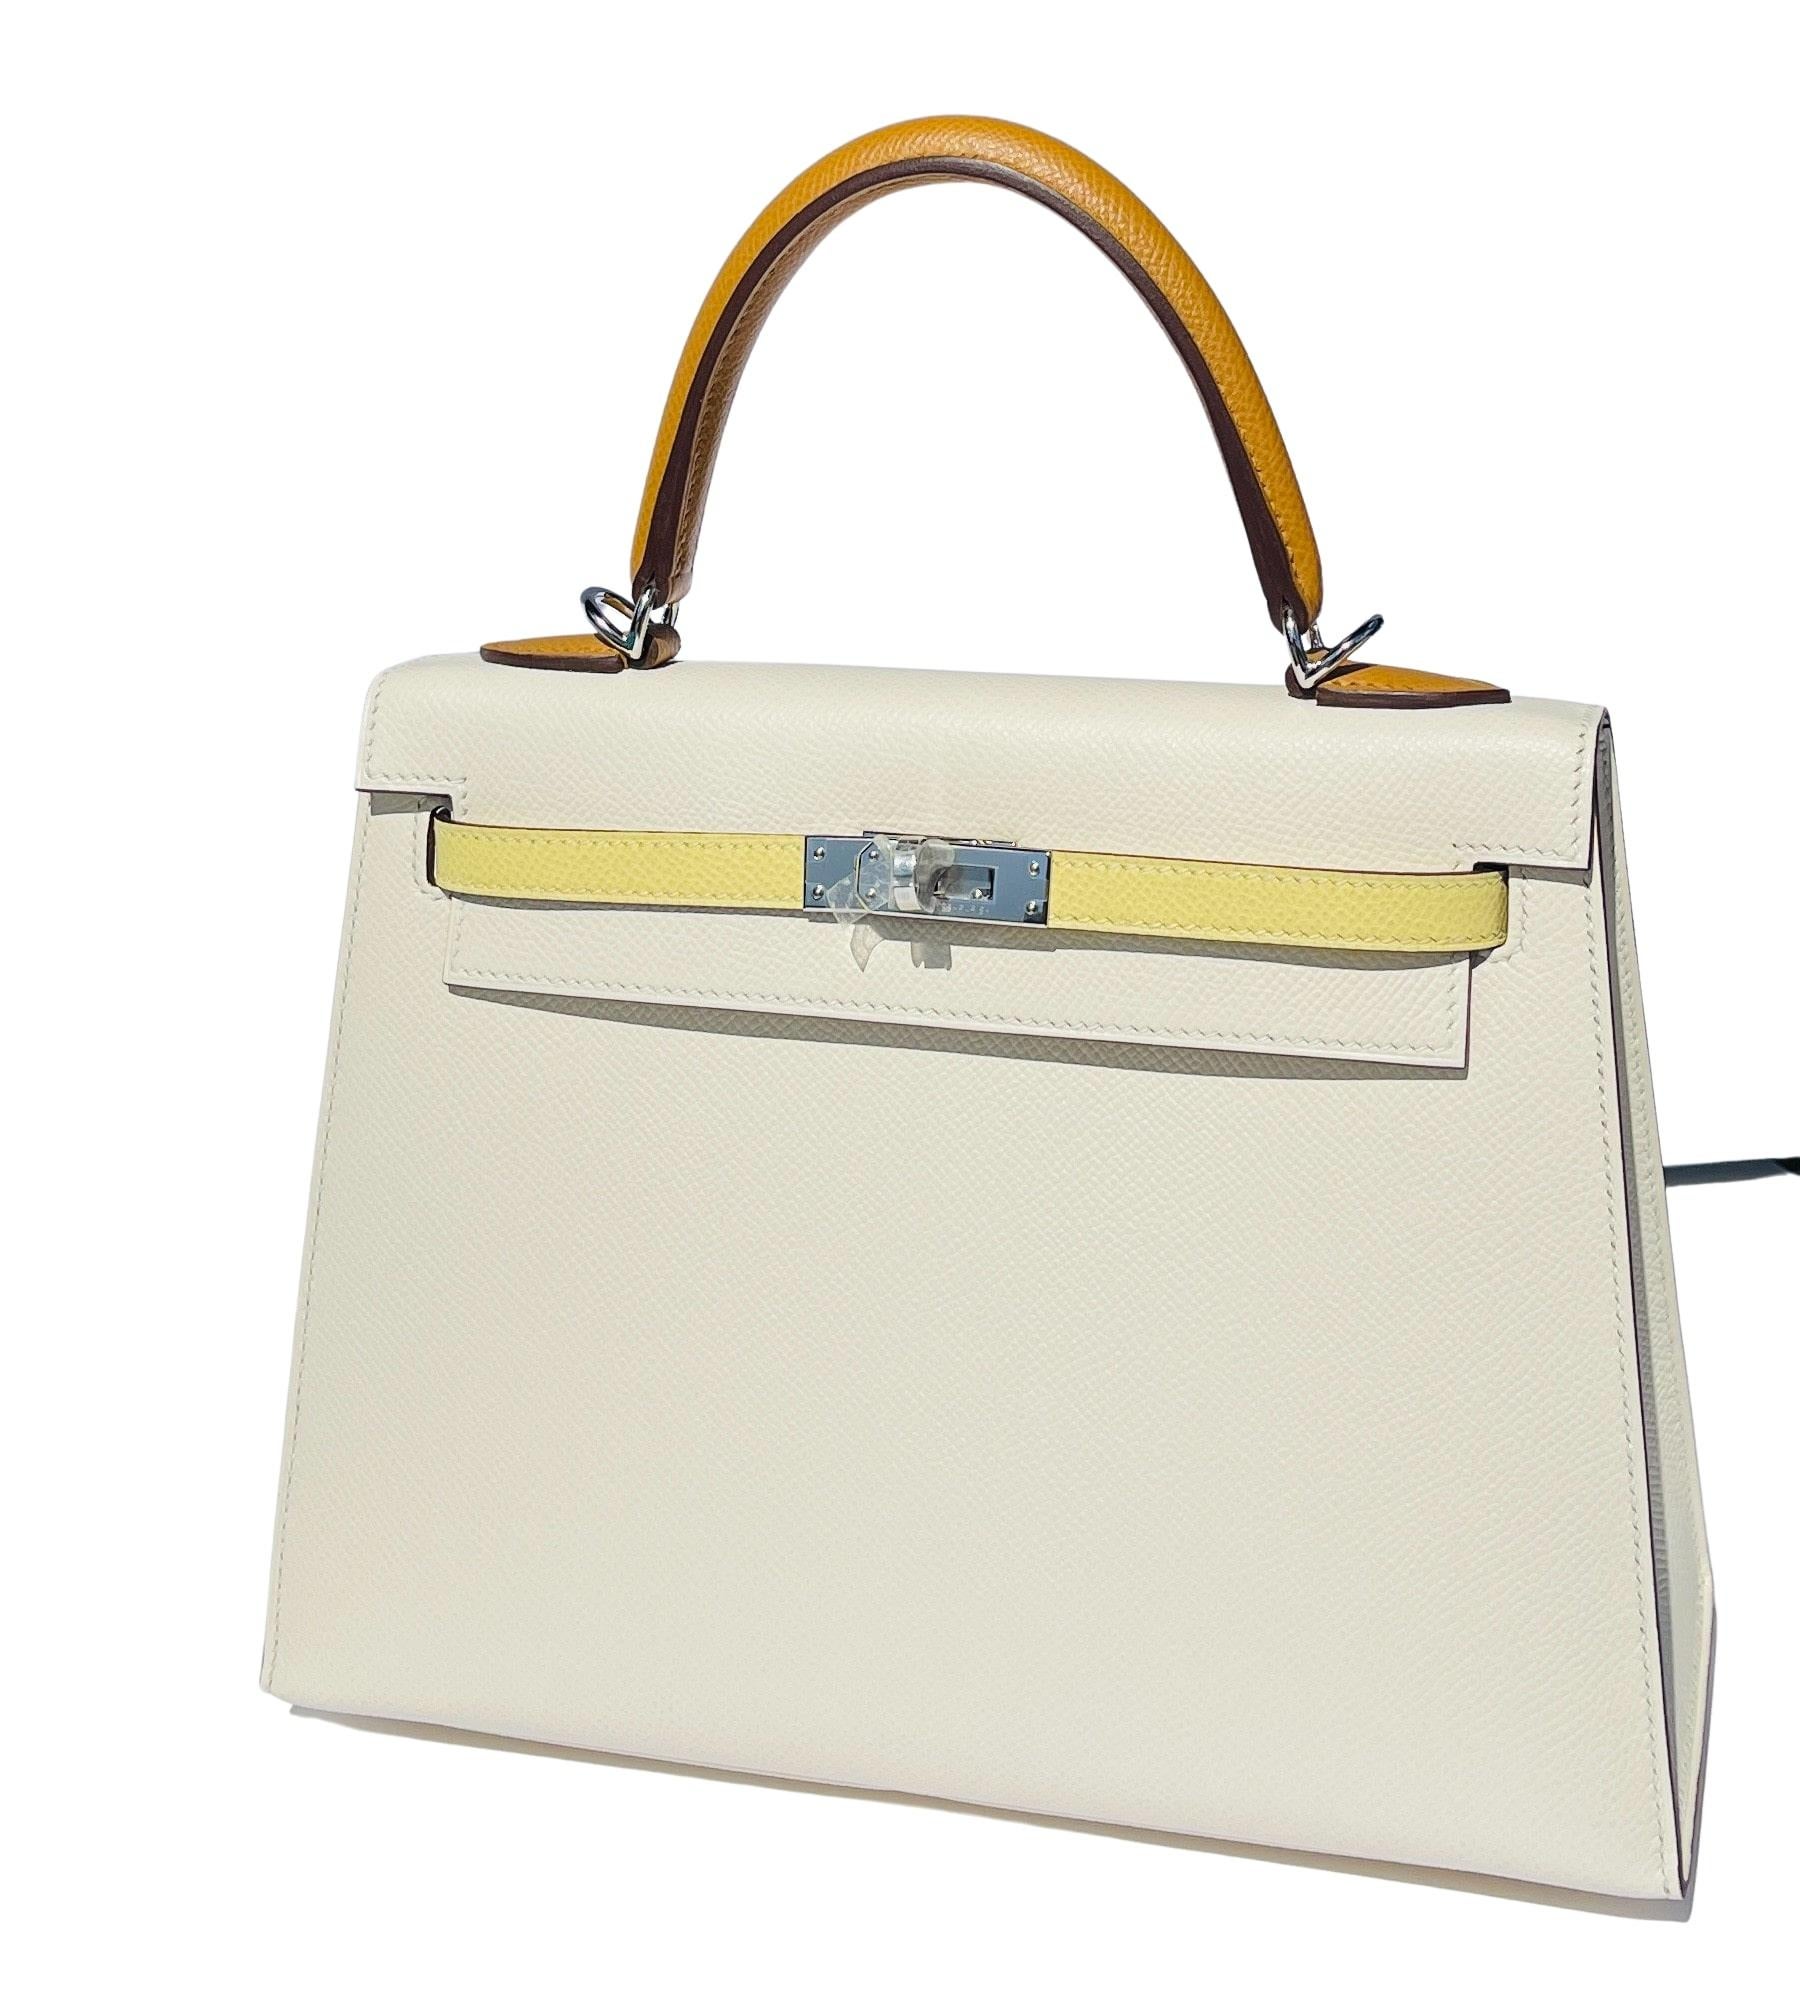 Hermes
Kelly 25cm Sellier
Most desired size in a Kelly
Brand new storefresh
Tri Tones 
3 colors
Limited edition
Dont miss out on this very limited Kelly
This Tri-Color Kelly is in the Sellier style
Nata, Jaune Poussin and Sesame epsom leather with